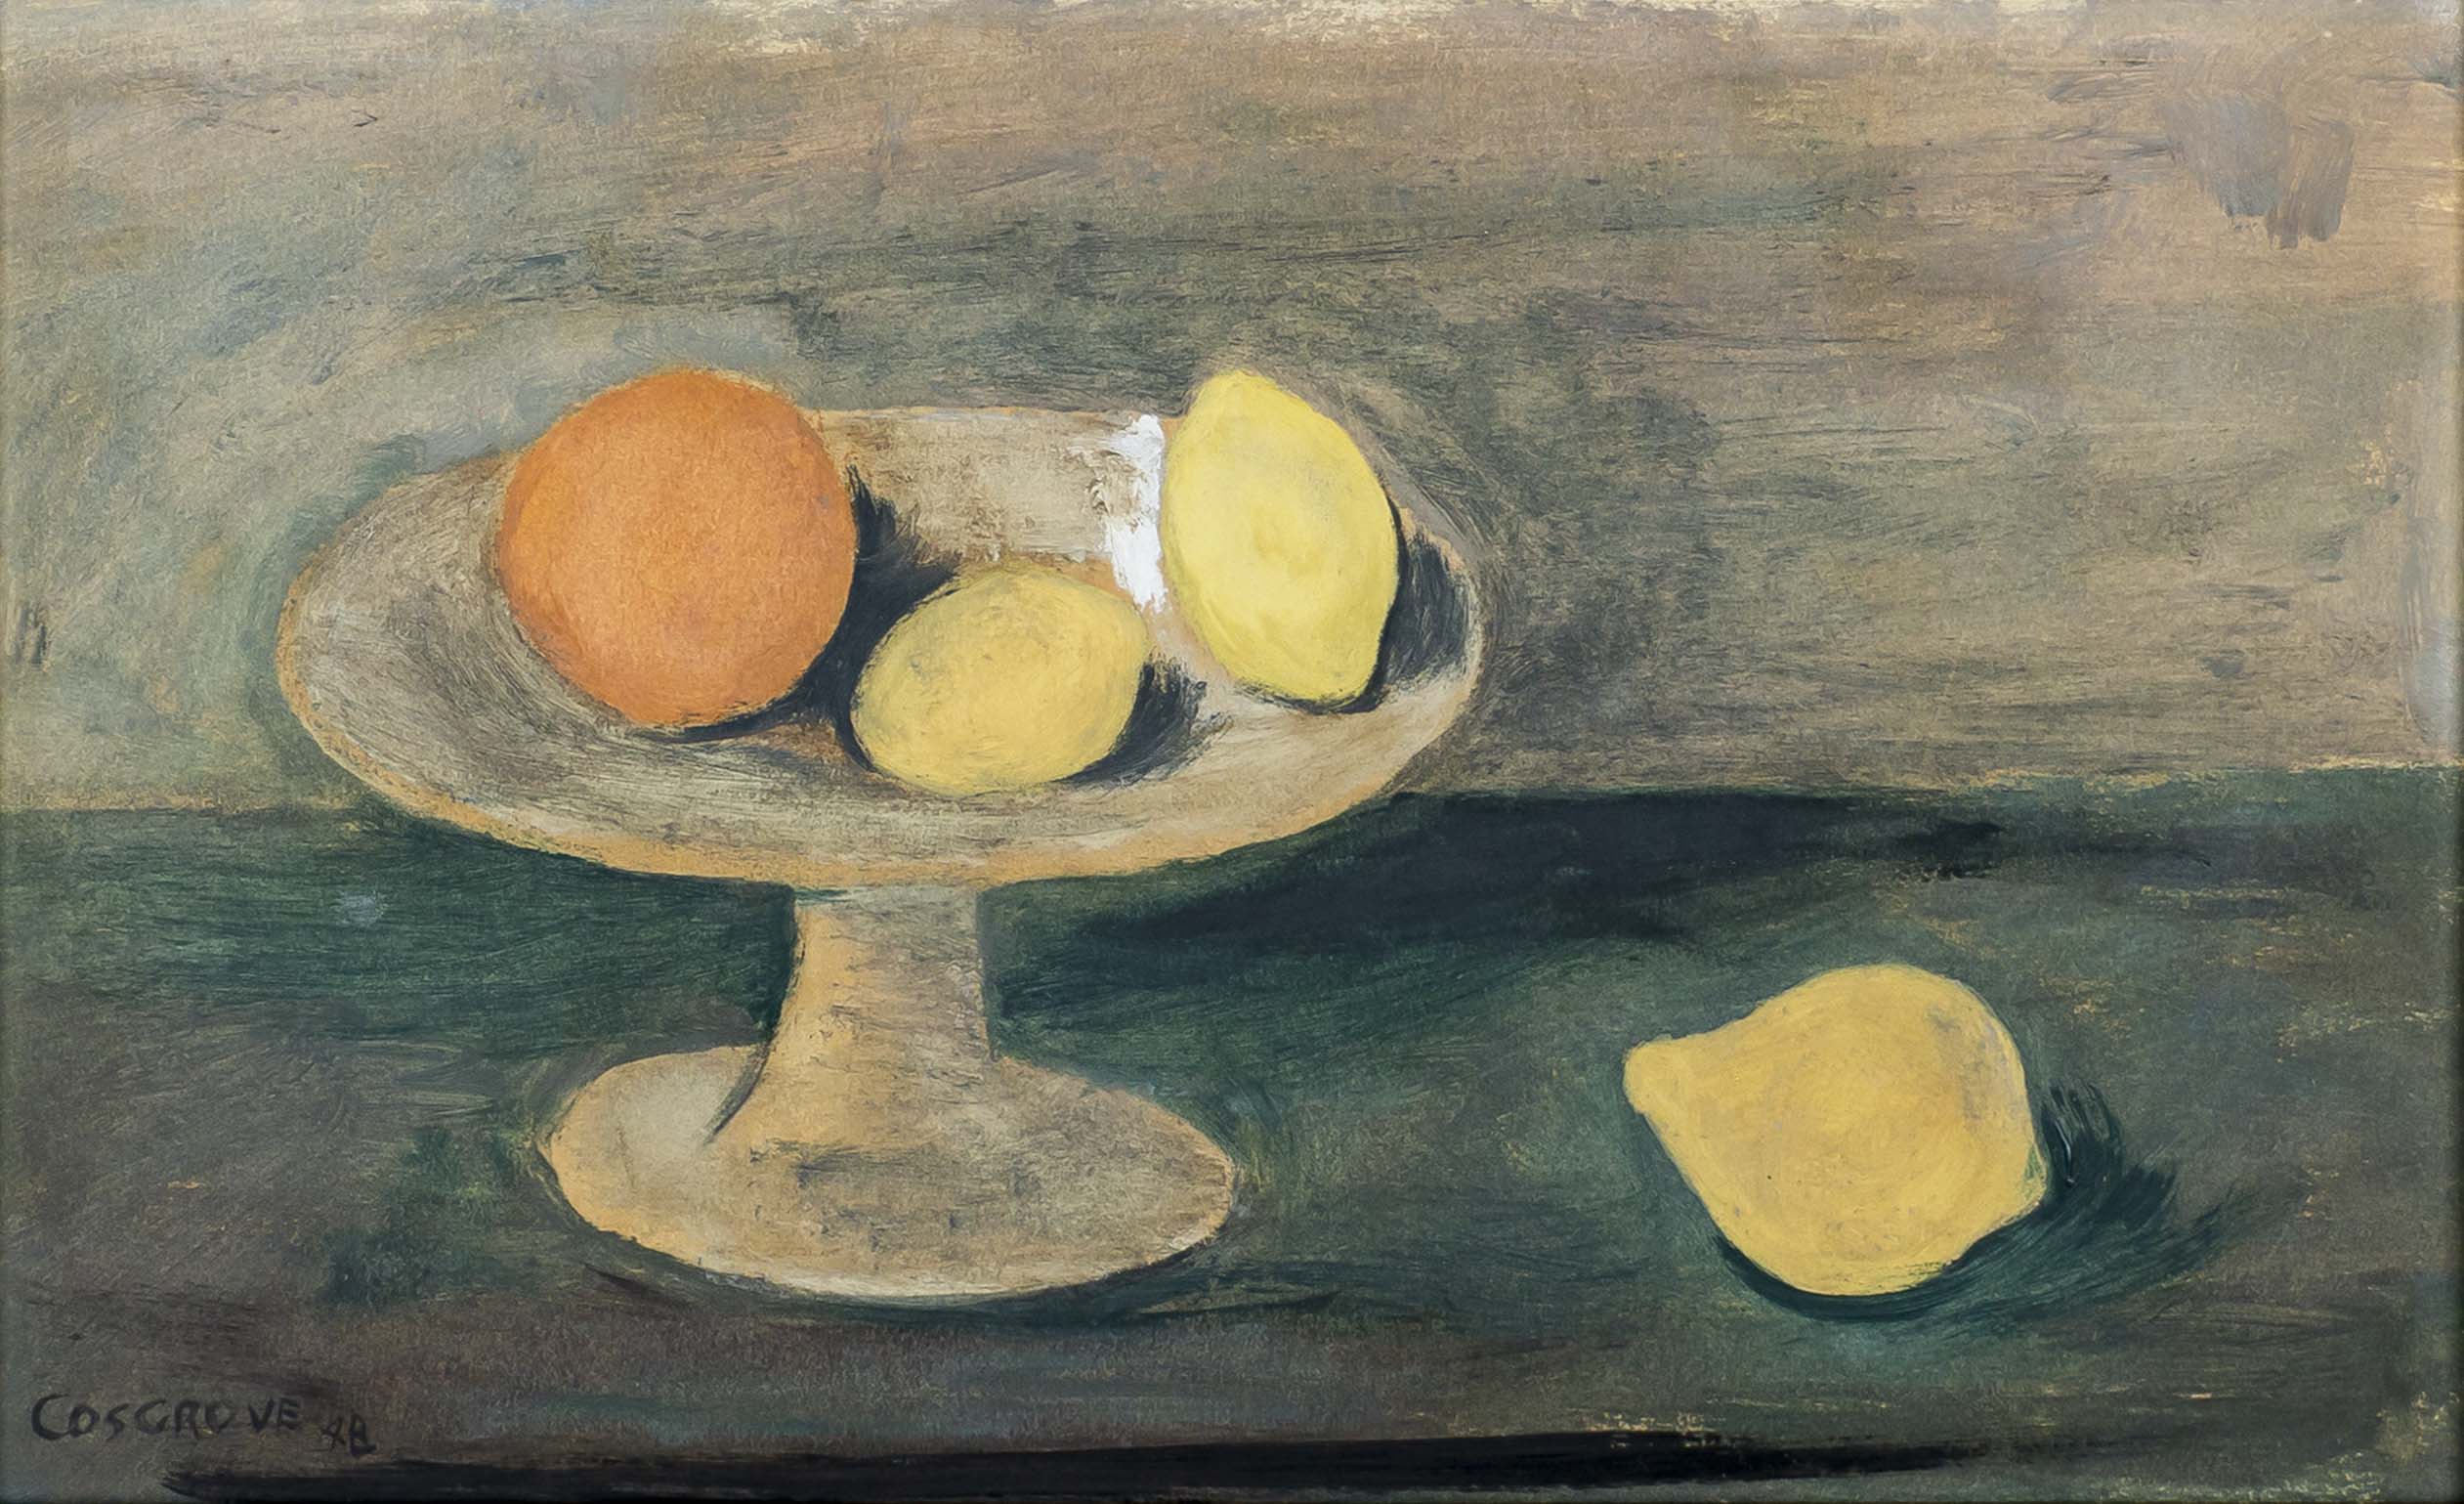 Stanley Cosgrove, Still Life with Lemons and Oranges